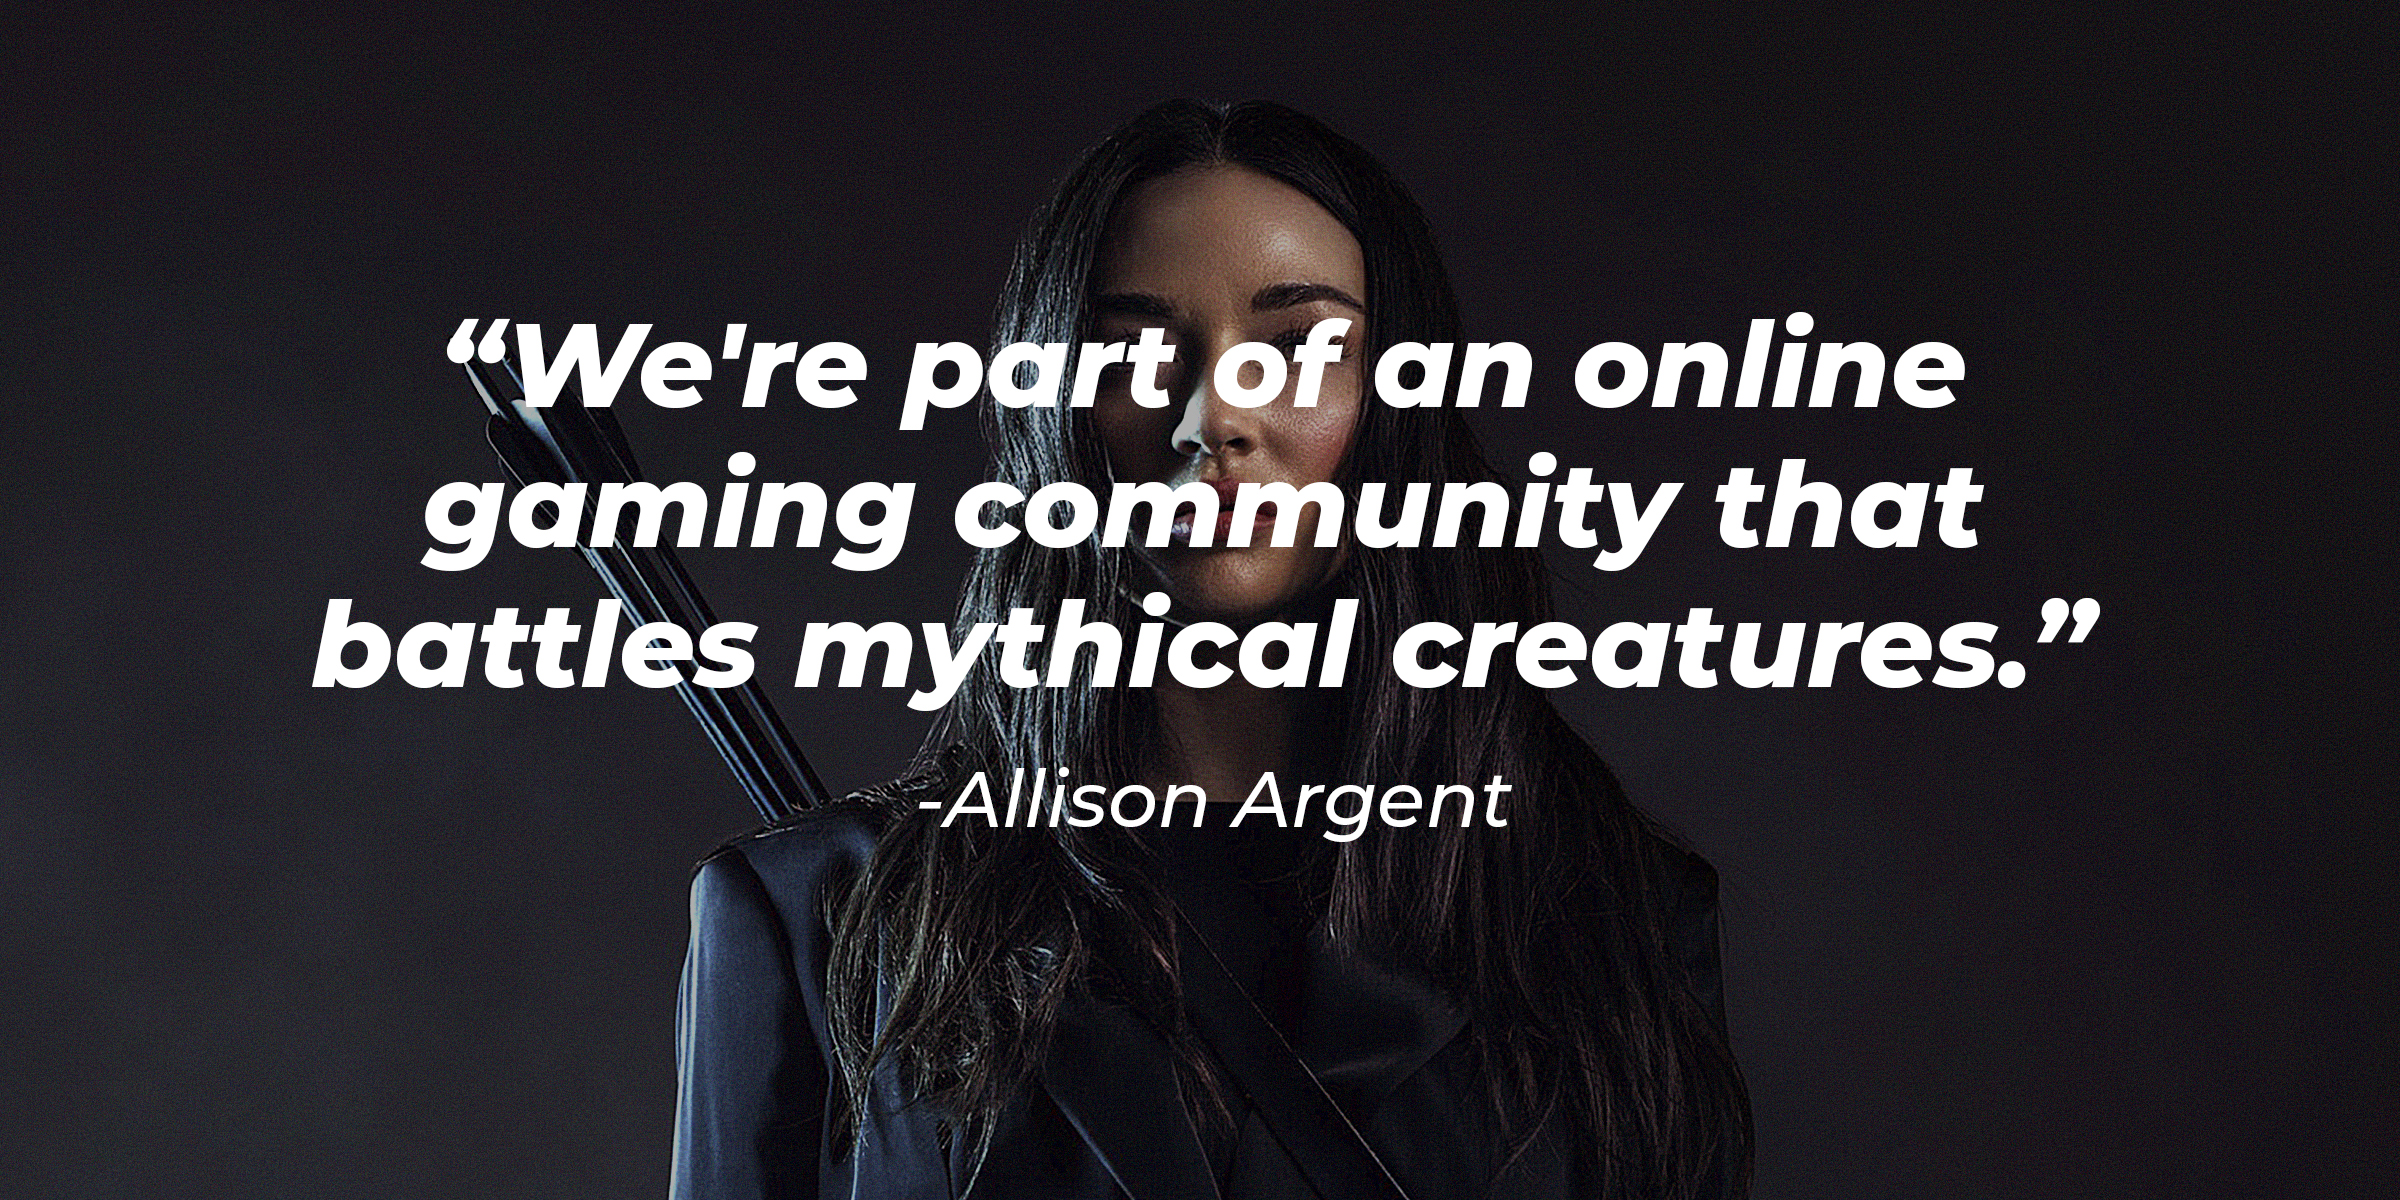 Allison Argent, with her quote:"We're part of an online gaming community that battles mythical creatures." | Source: facebook.com/TeenWolf